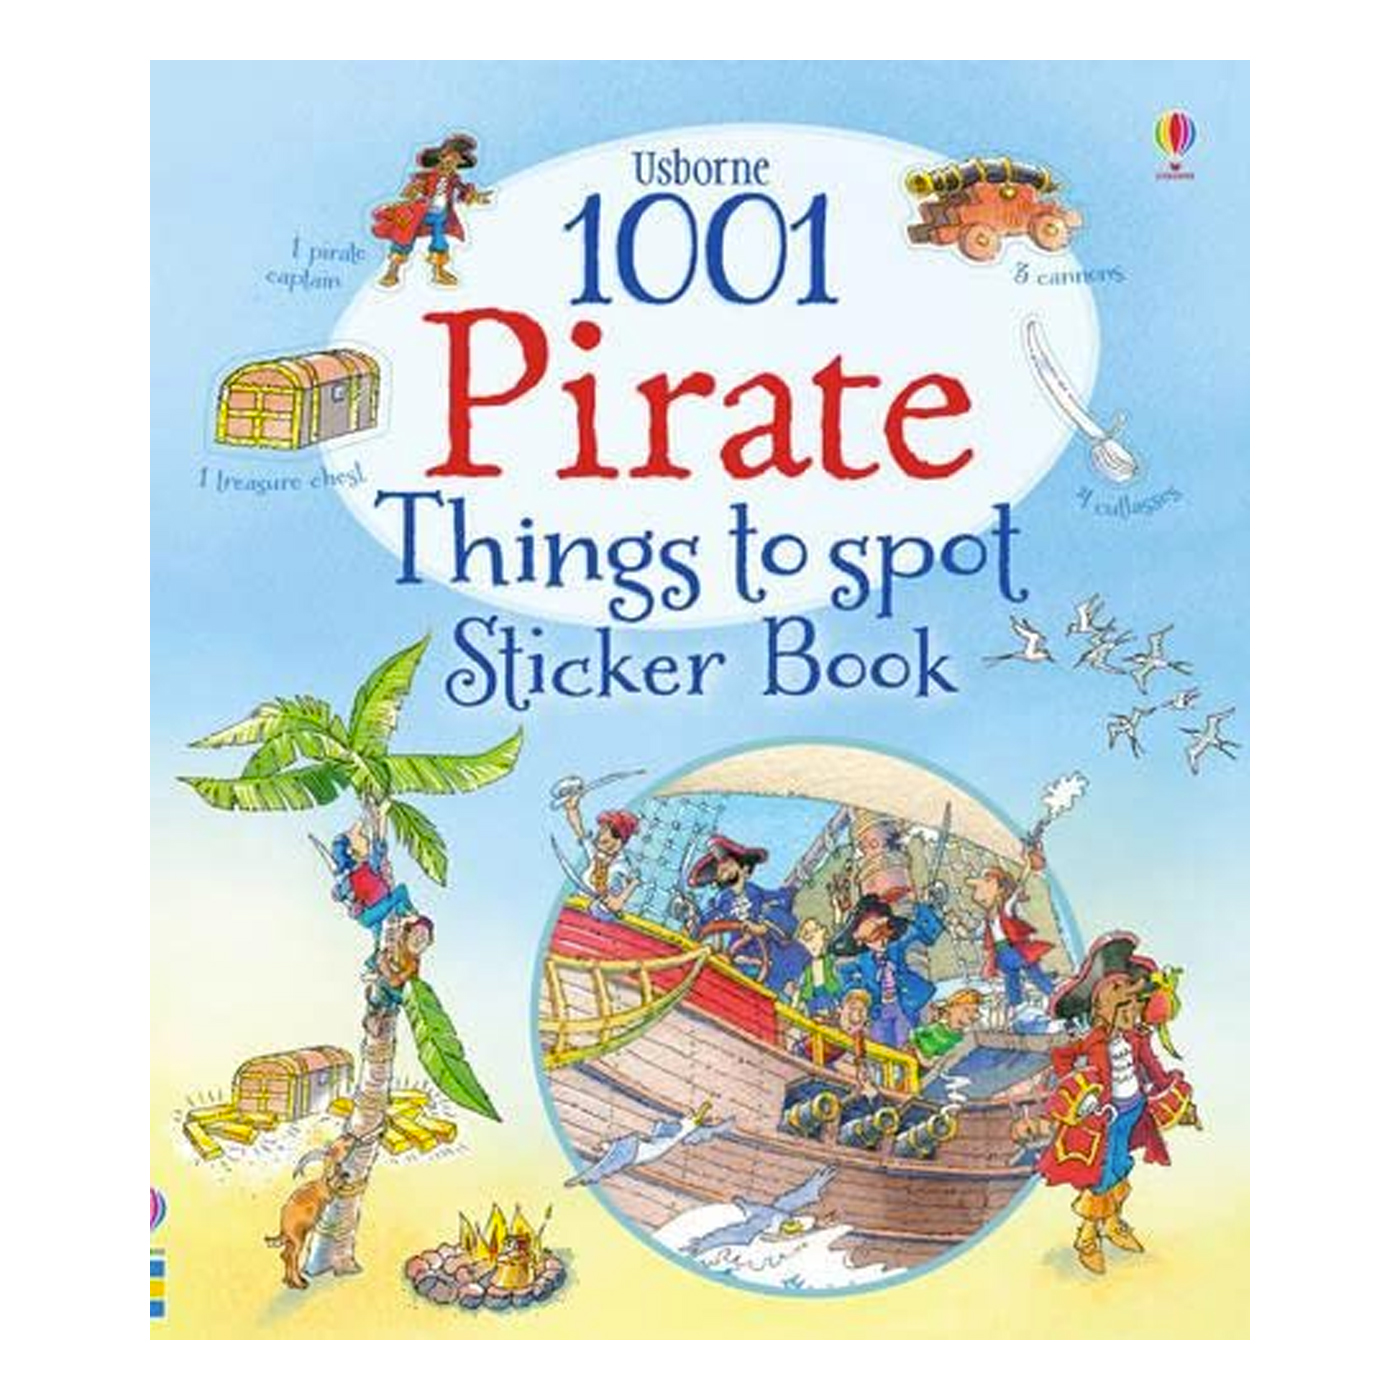  1001 Pirate Things To Spot Sticker Book